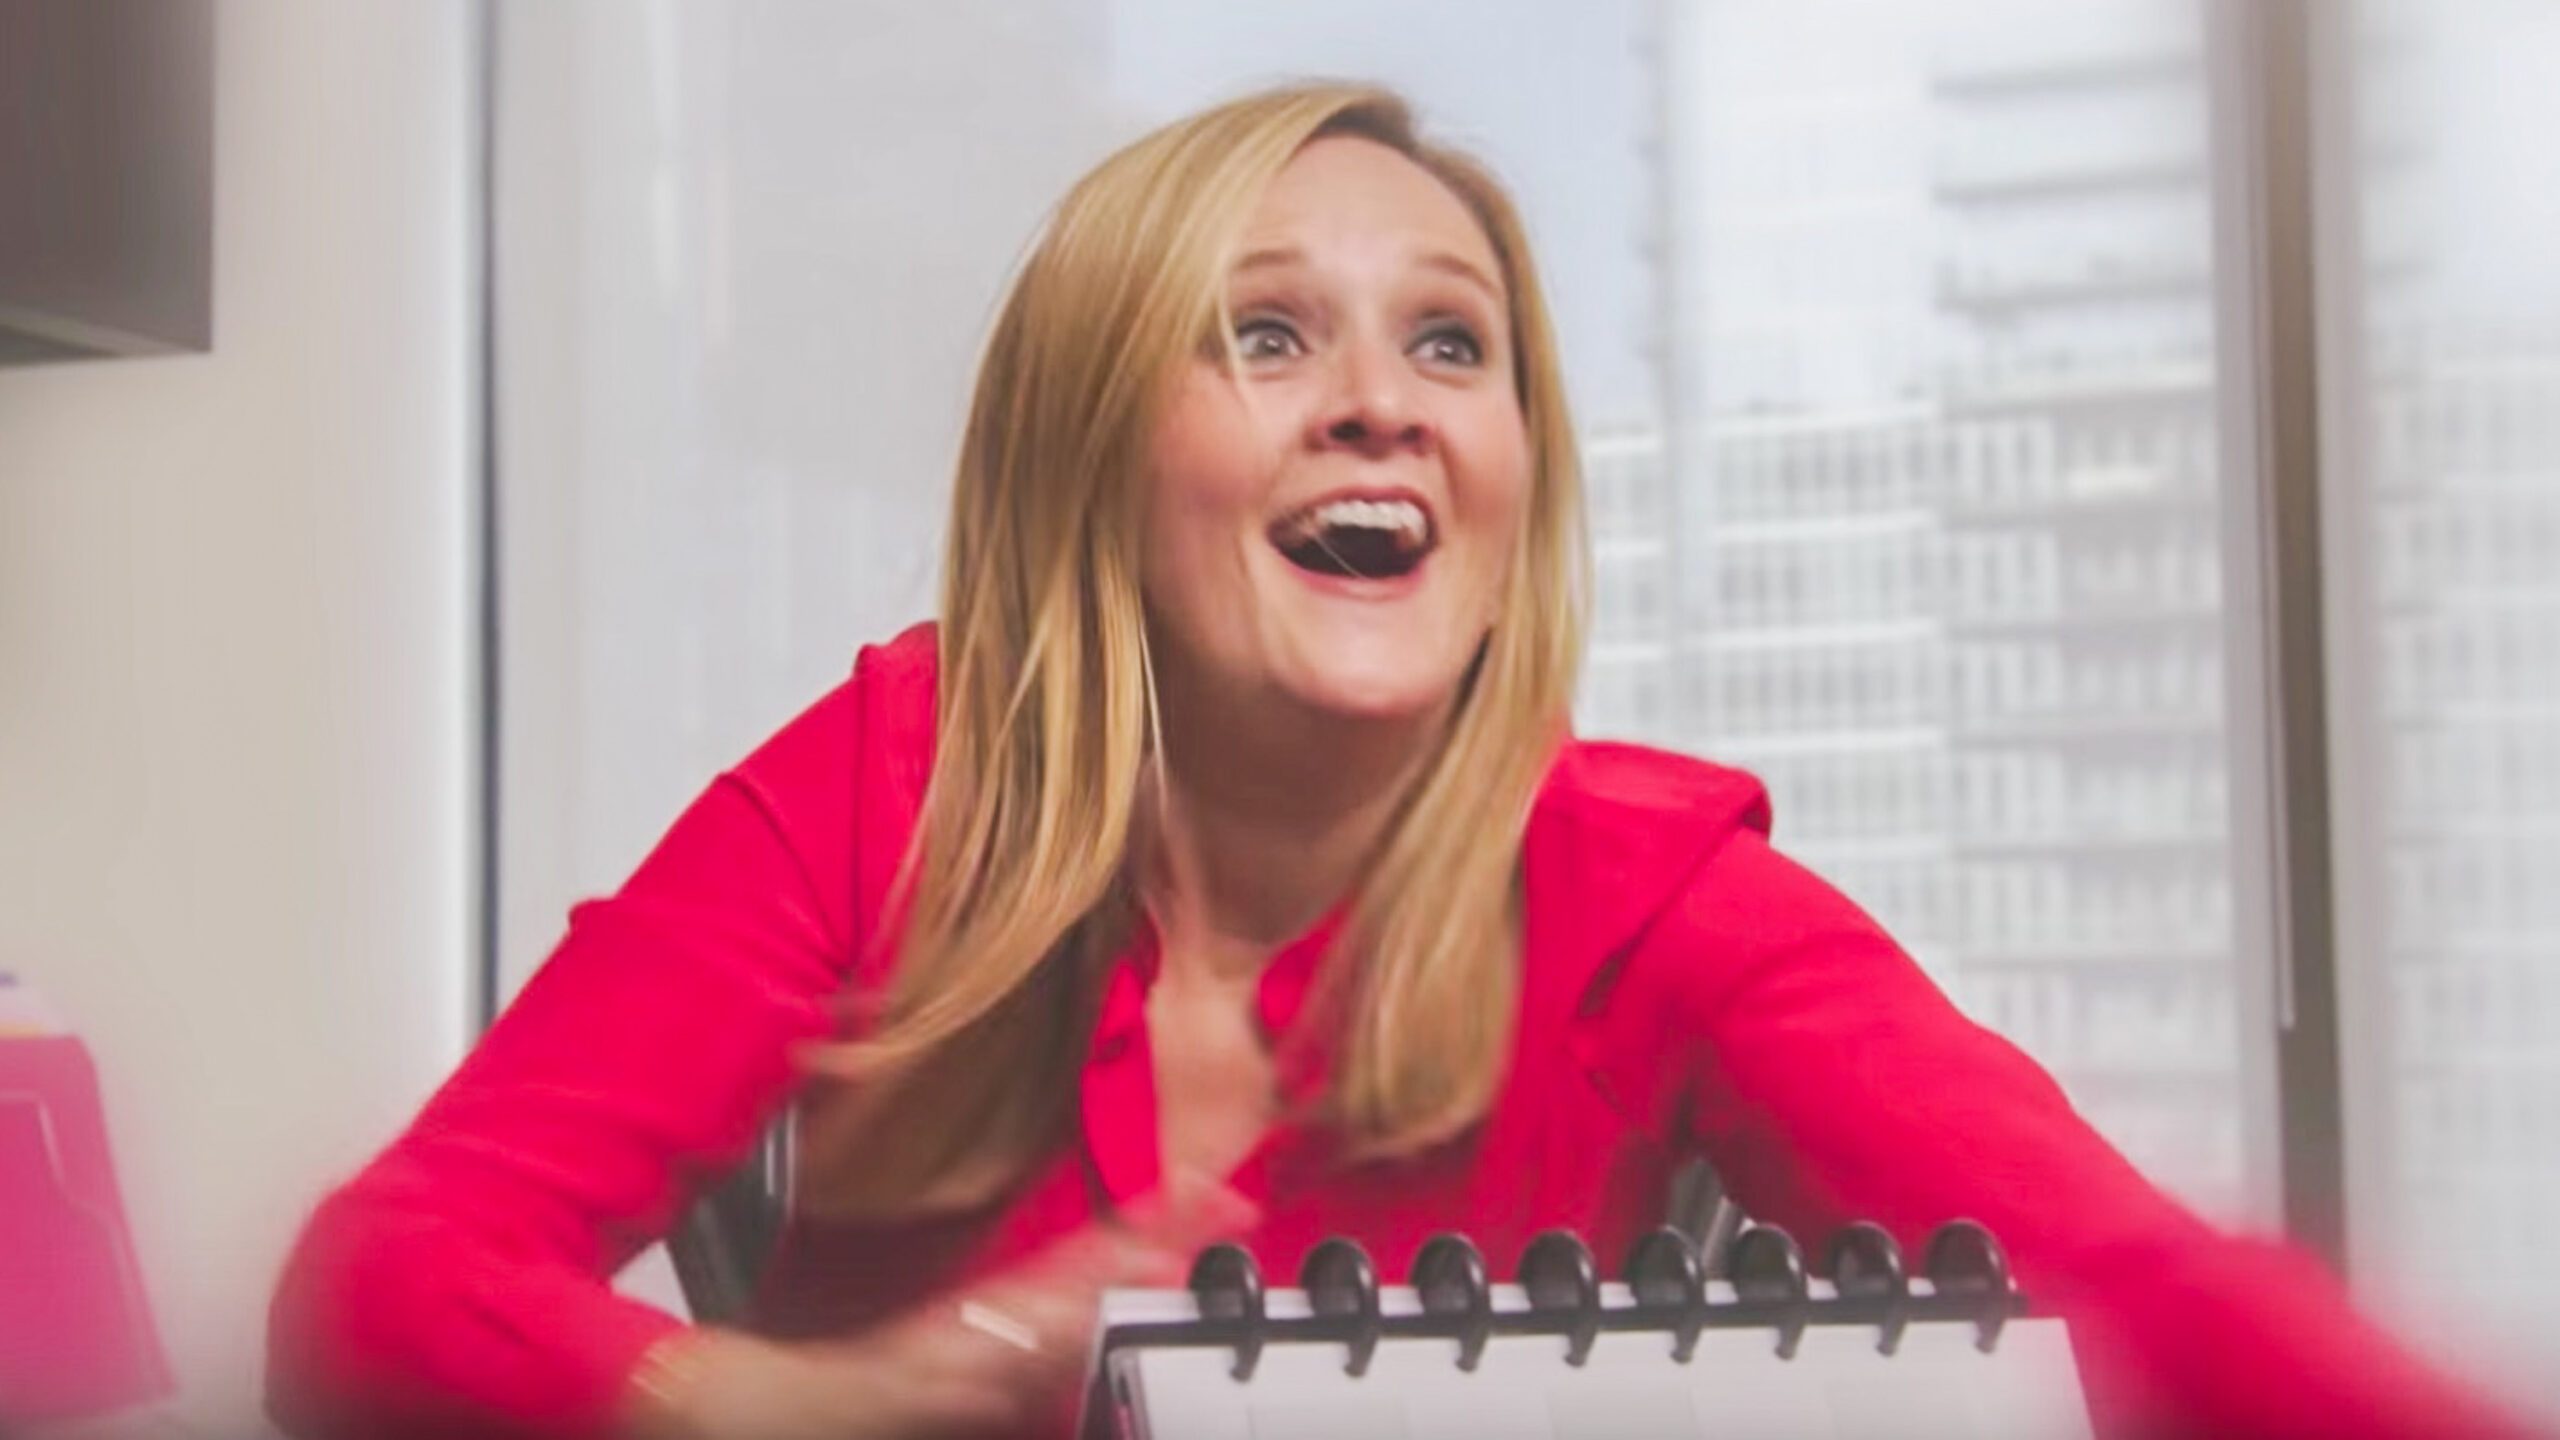 WATCH: What if Donald Trump didn’t win? Samantha Bee imagines